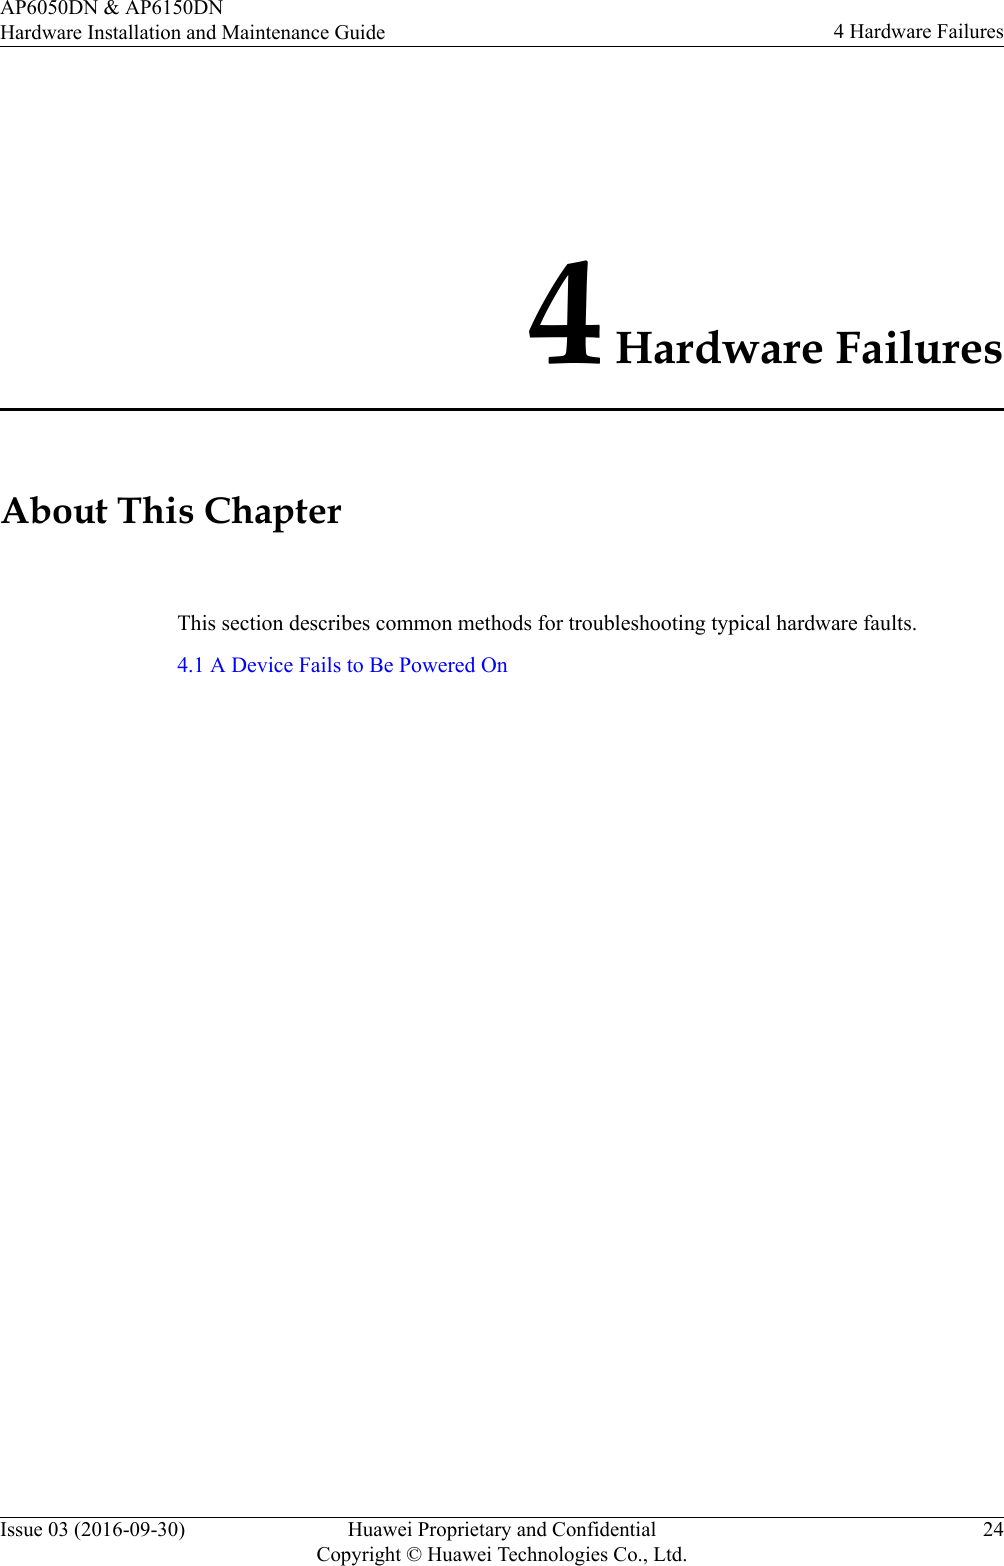 4 Hardware FailuresAbout This ChapterThis section describes common methods for troubleshooting typical hardware faults.4.1 A Device Fails to Be Powered OnAP6050DN &amp; AP6150DNHardware Installation and Maintenance Guide 4 Hardware FailuresIssue 03 (2016-09-30) Huawei Proprietary and ConfidentialCopyright © Huawei Technologies Co., Ltd.24